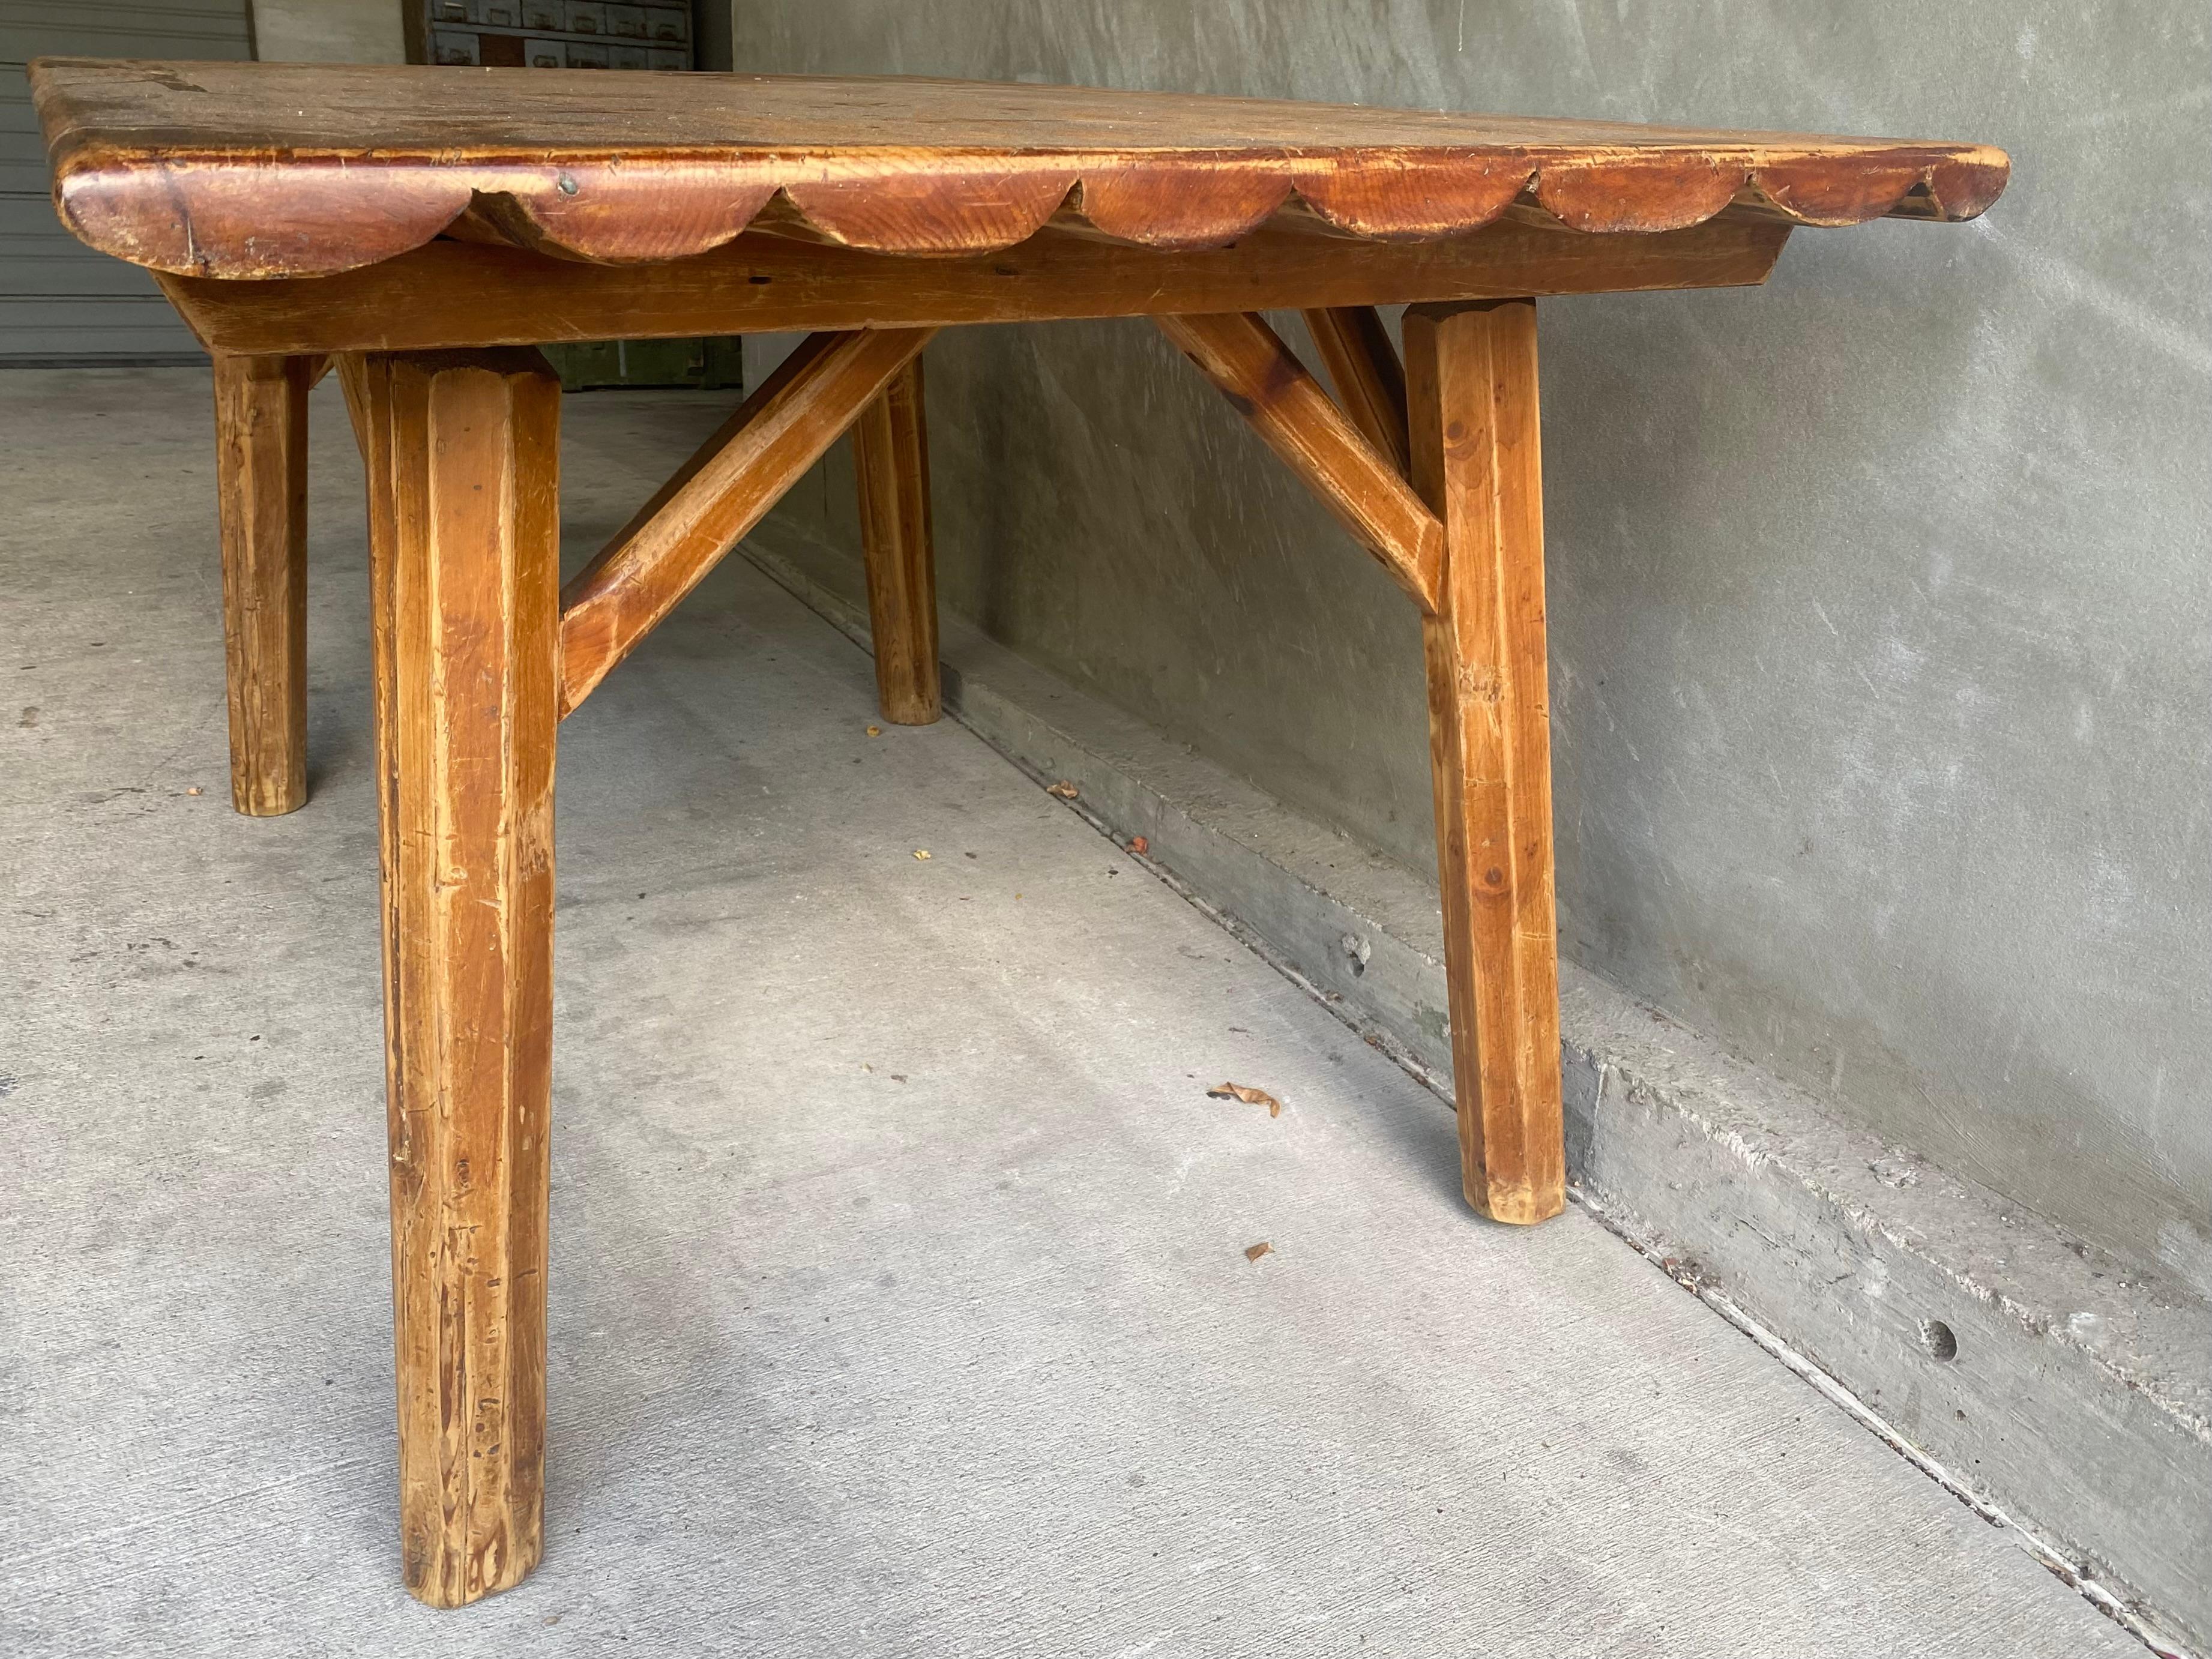 Dining table, hand hewn from solid oak with wax finish.